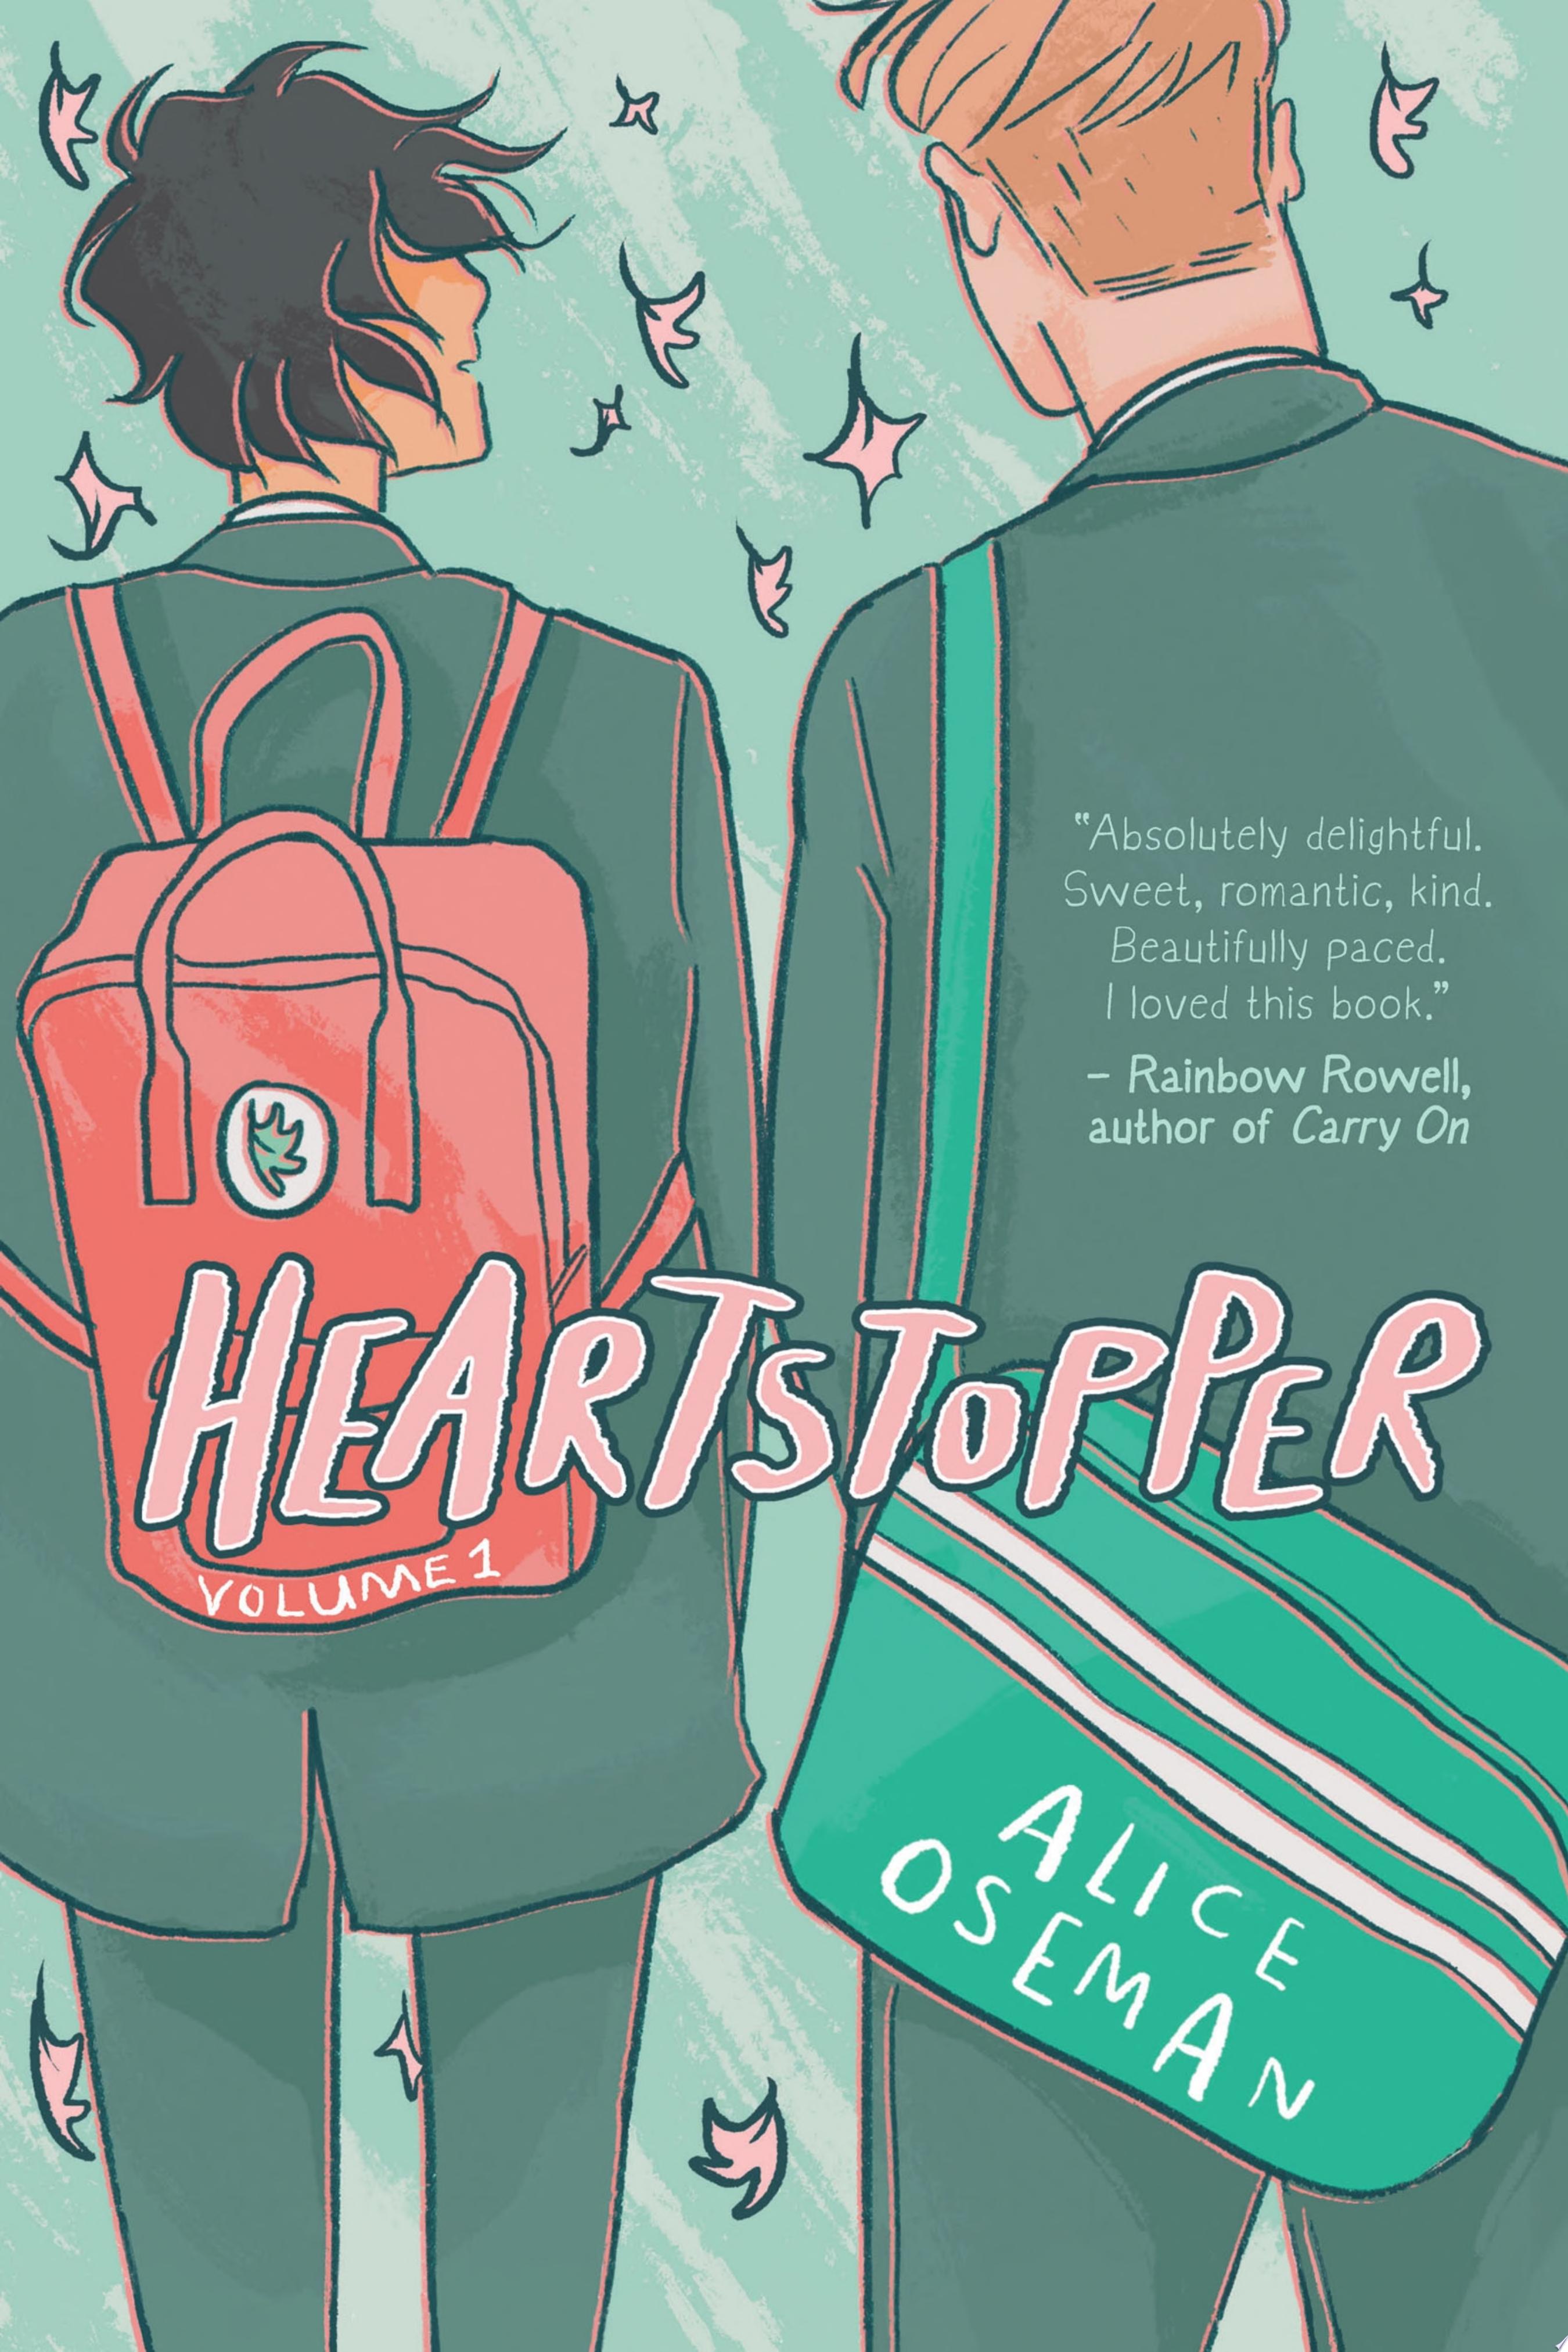 Image for "Heartstopper #1: A Graphic Novel"